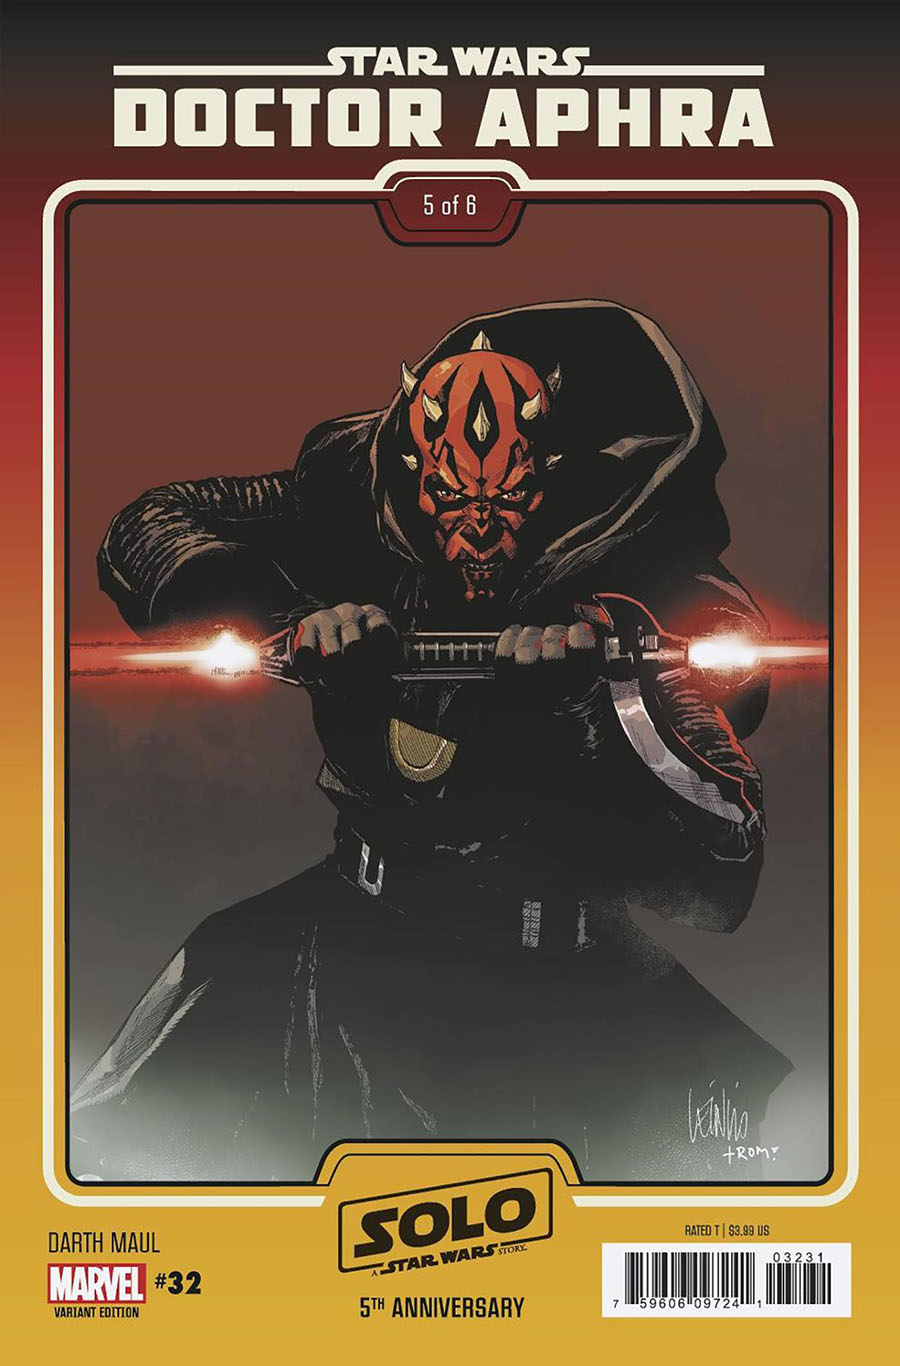 Star Wars Doctor Aphra Vol 2 #32 Cover C Variant Leinil Francis Yu Solo Movie 5th Anniversary Darth Maul Cover